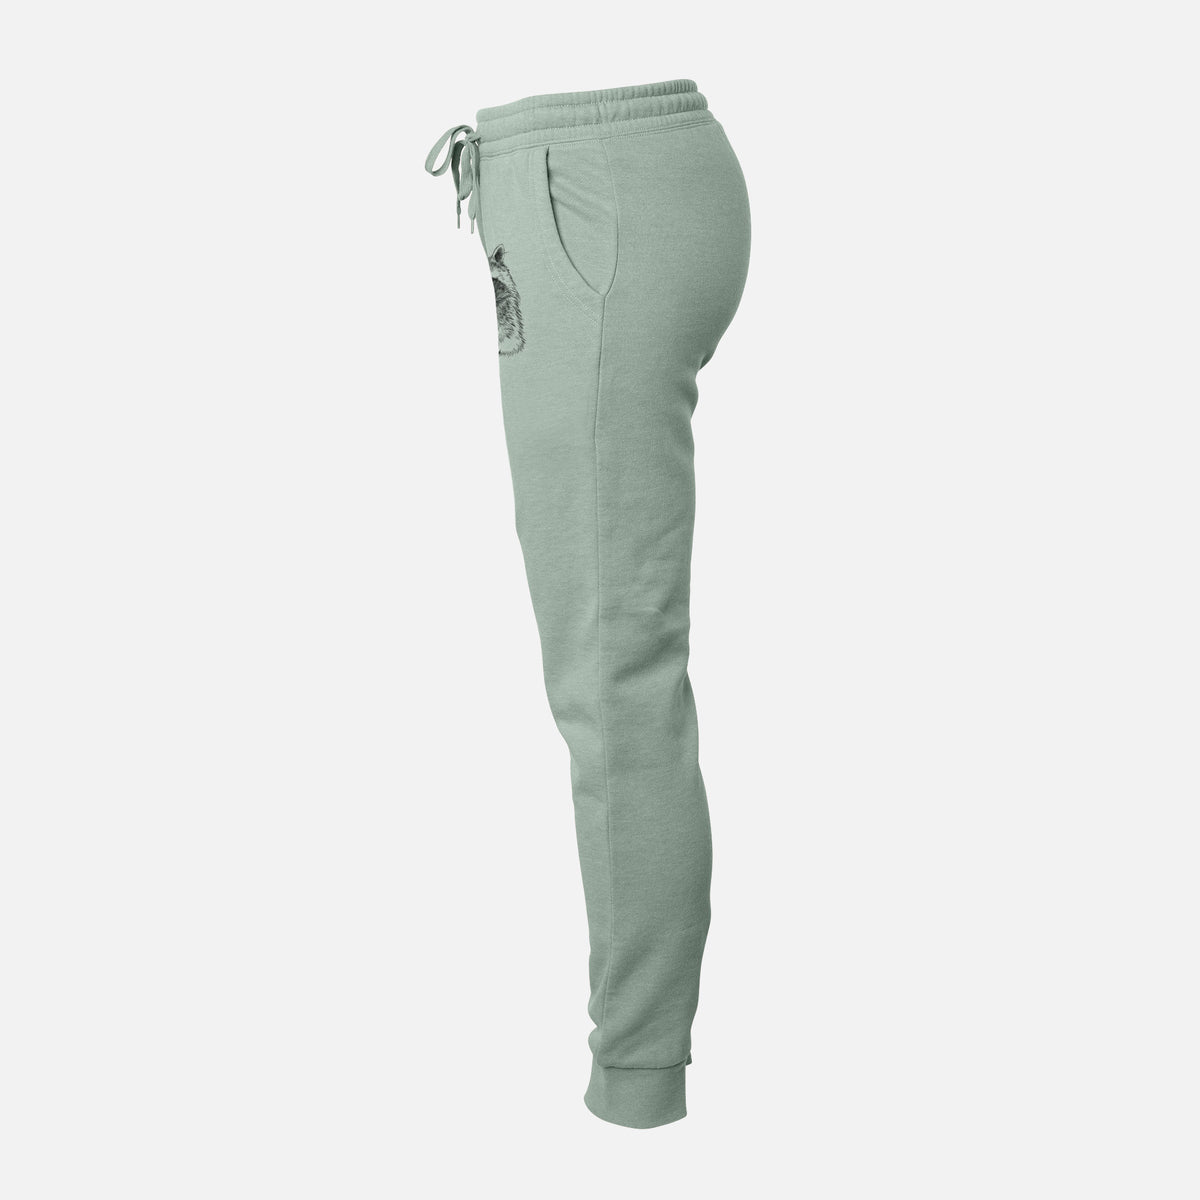 It&#39;s All Connected - Orca - Women&#39;s Cali Wave Jogger Sweatpants